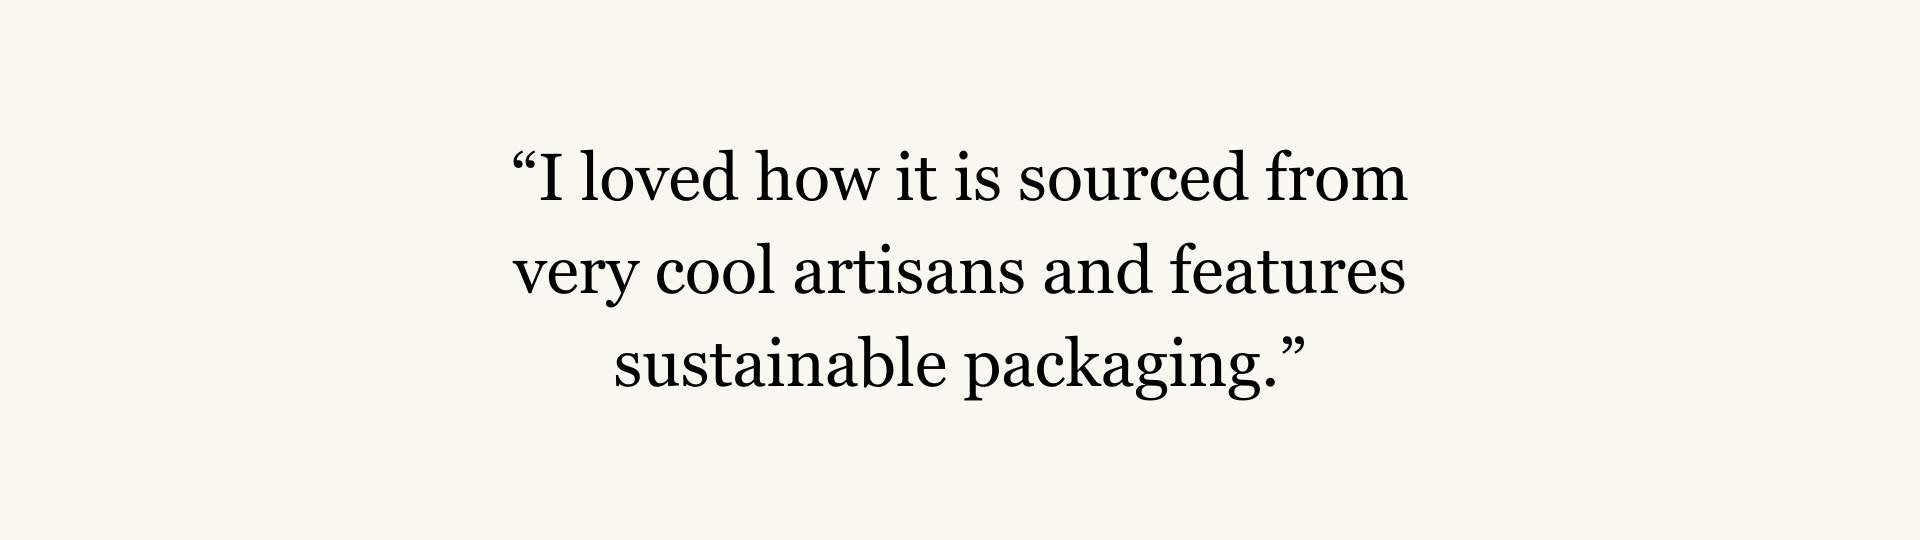 A slide that reads “I loved how it is sourced from very cool artisans and features sustainable packaging.”